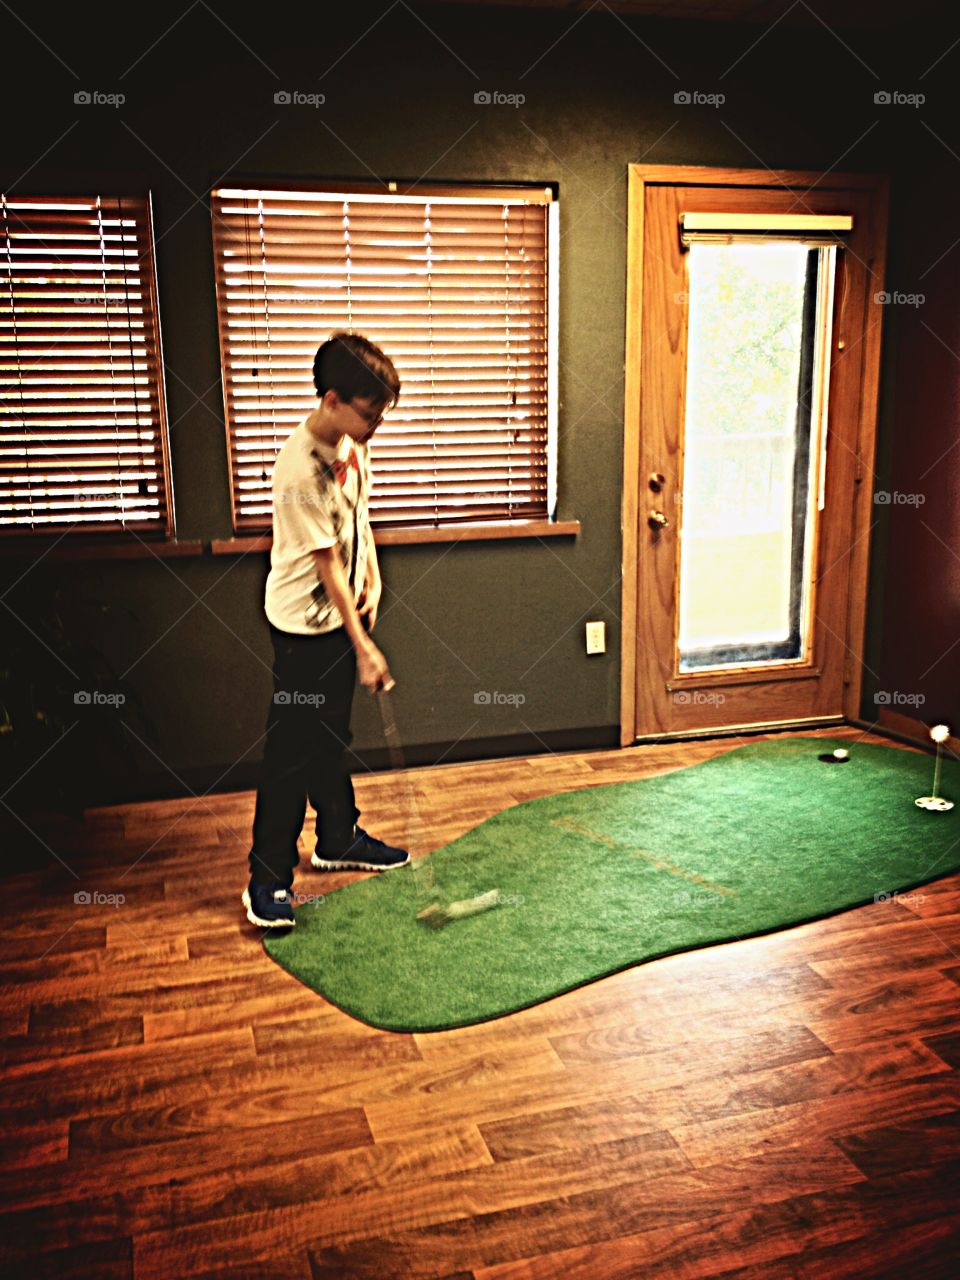 Putting practice while waiting for the eye doctor. 